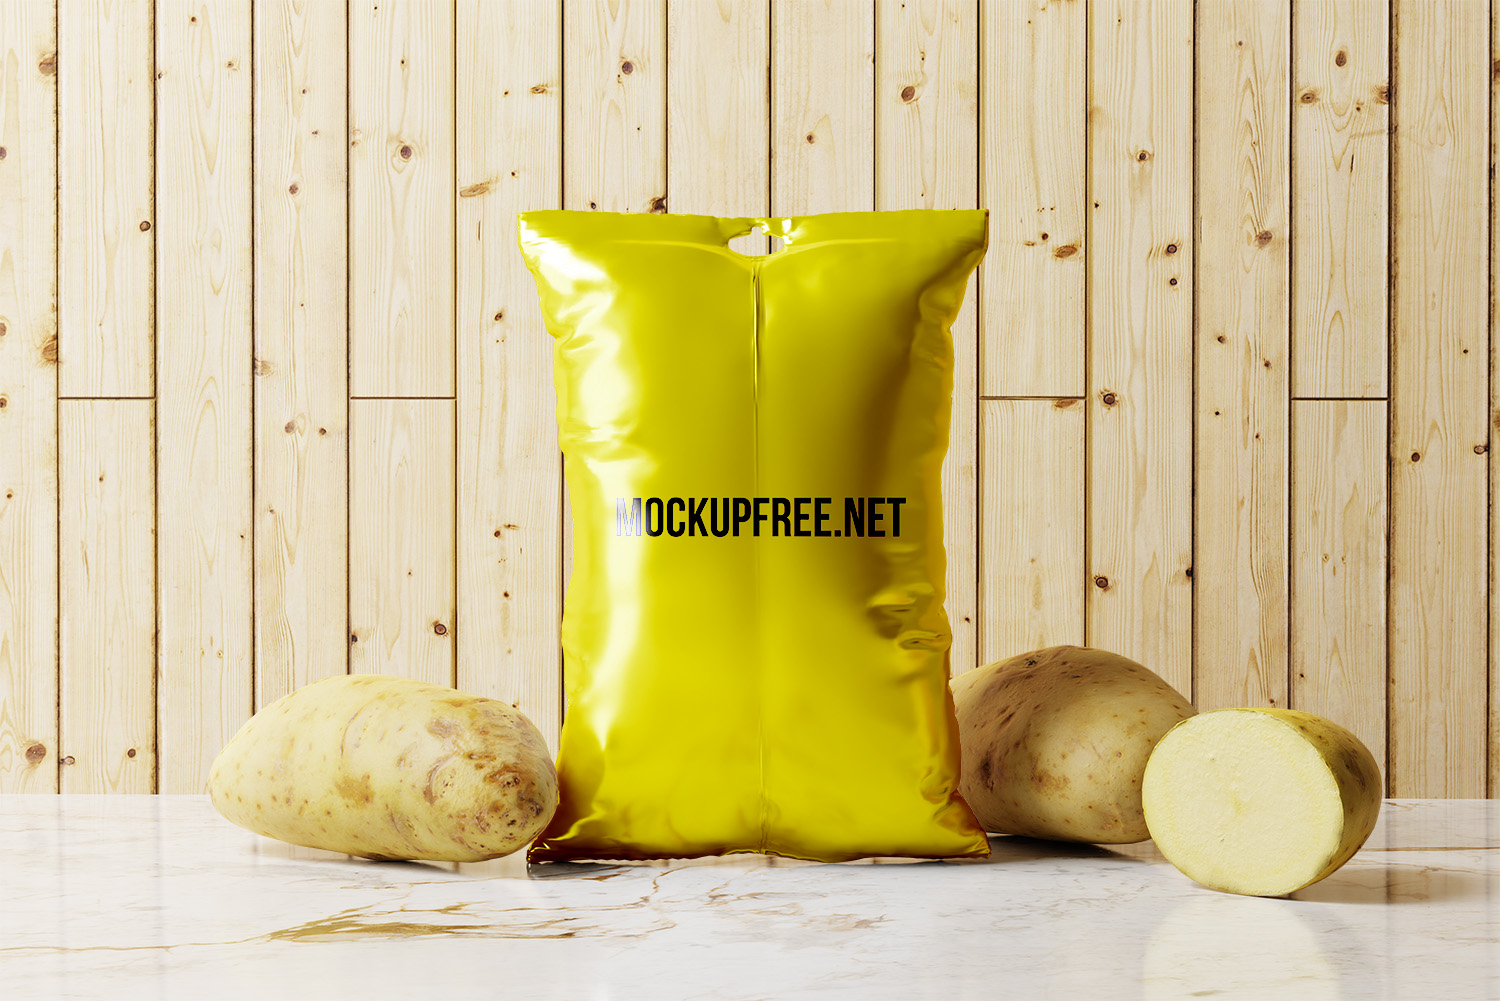 Potato Chips Bag Mockup with Potatoes in Background Free Mockups